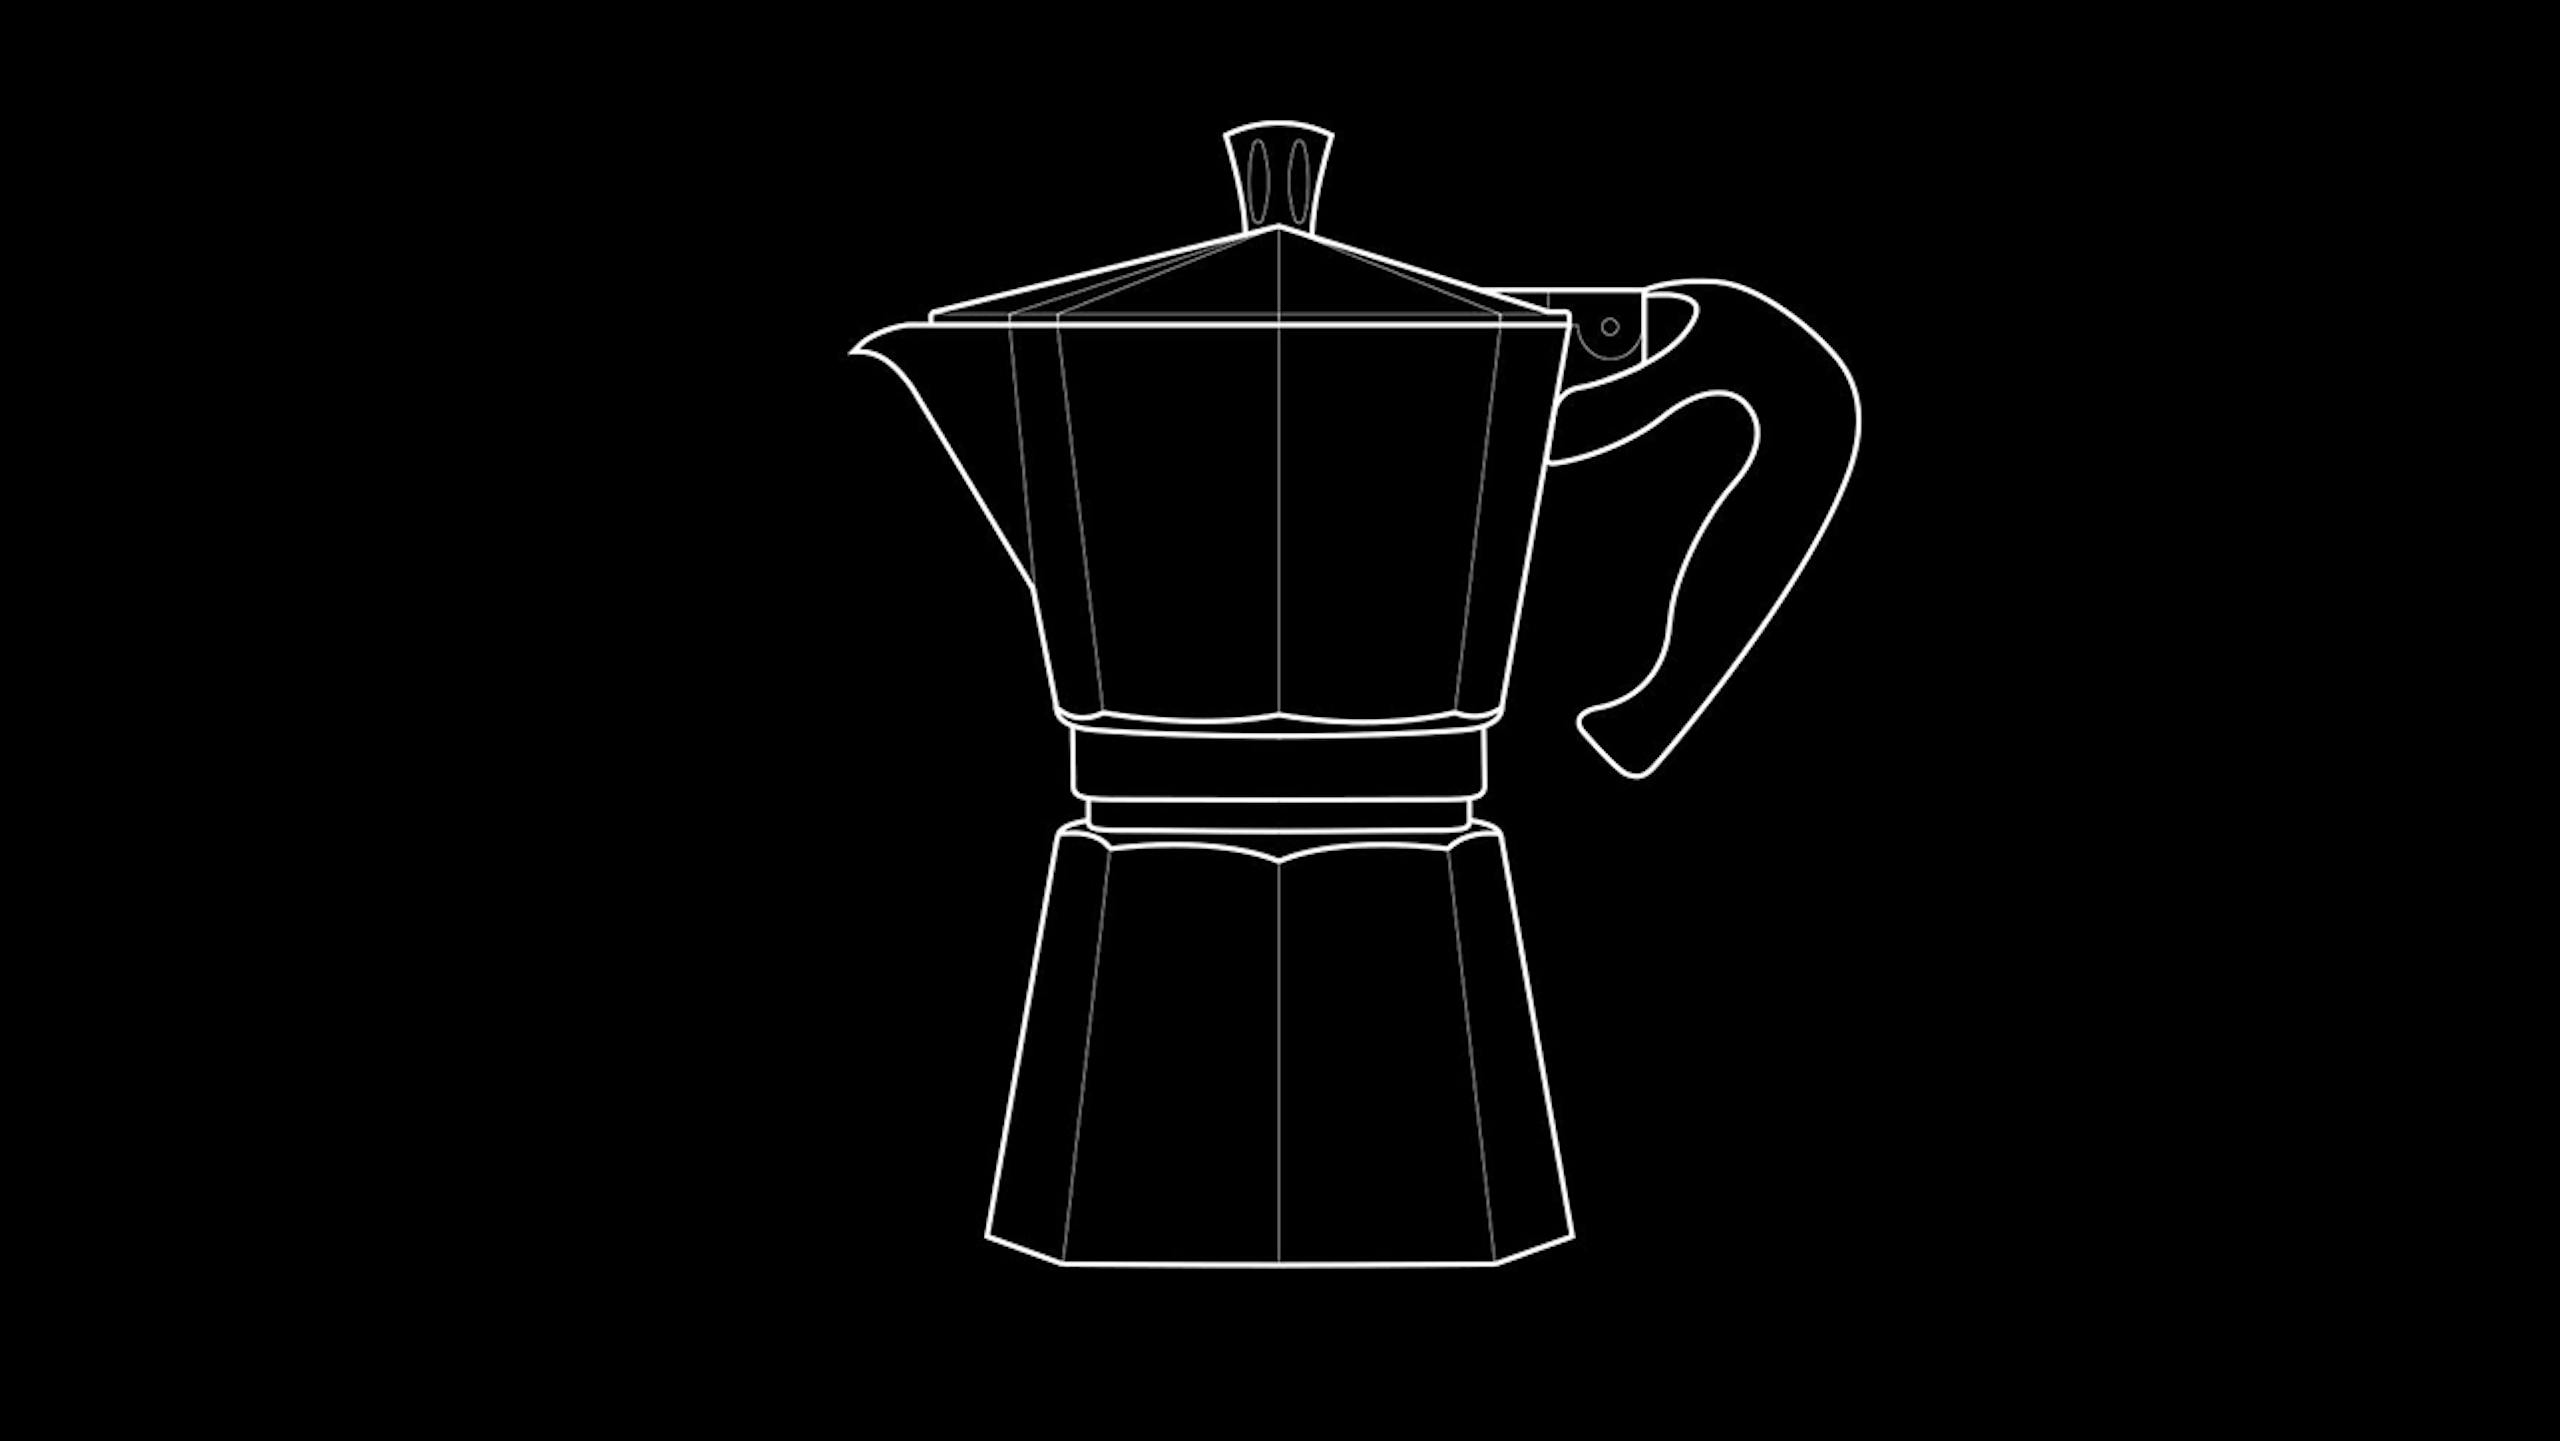 The moka pot brews coffee by passing boiling water pressurised by steam through ground coffee. Named after the Yemeni city of Mocha, it was invented by the Italian engineer Alfonso Bialetti in 1933 and quickly became one of the staples of Italian culture.